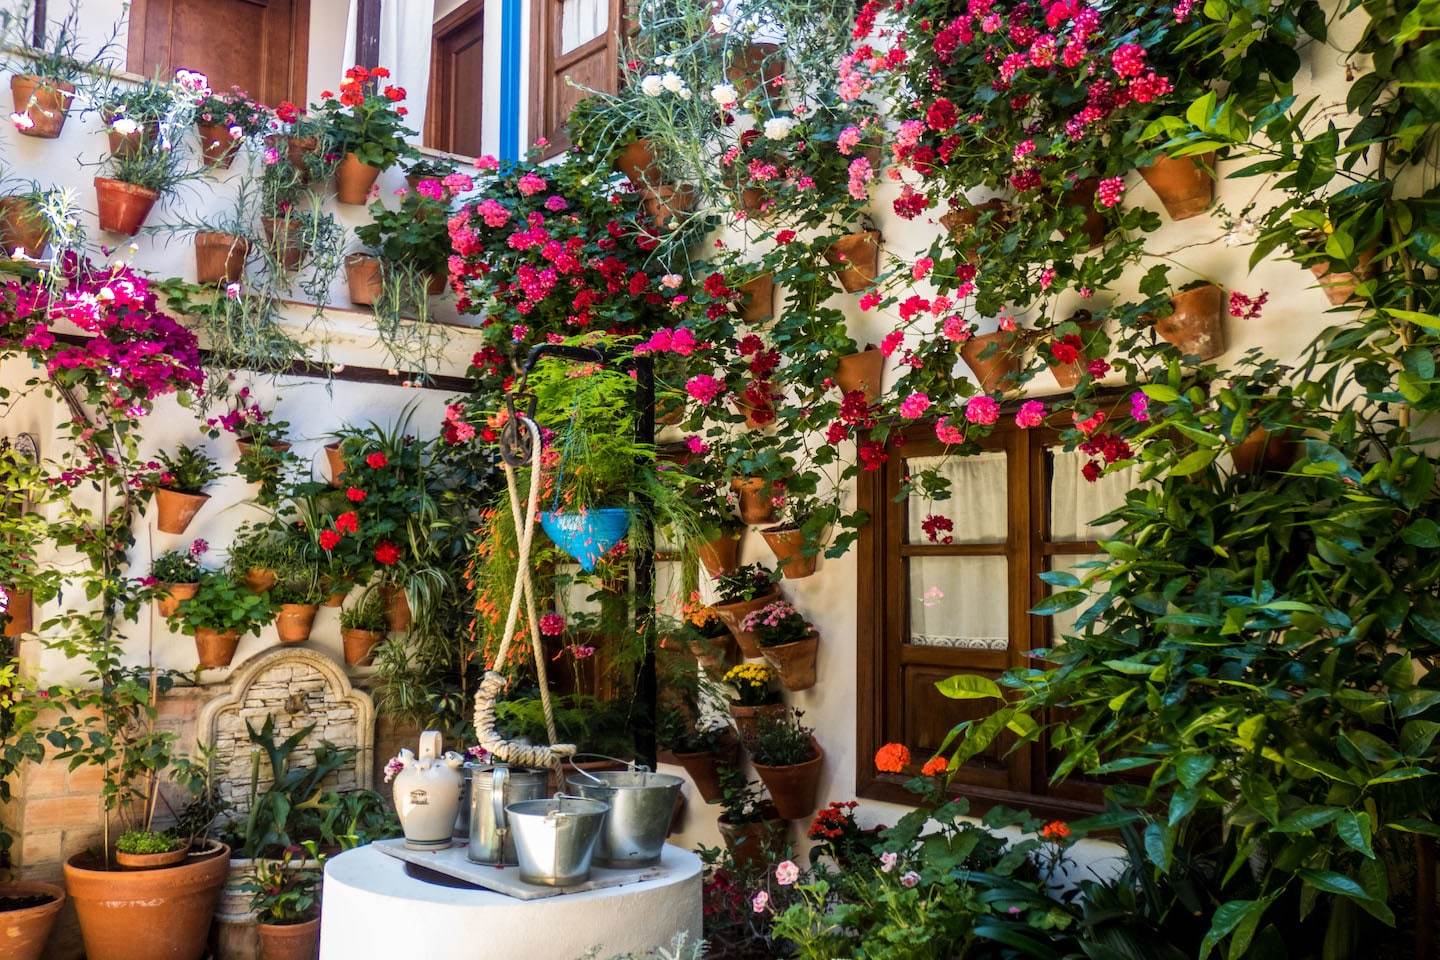 Patio in Cordoba covered in plants and flowers